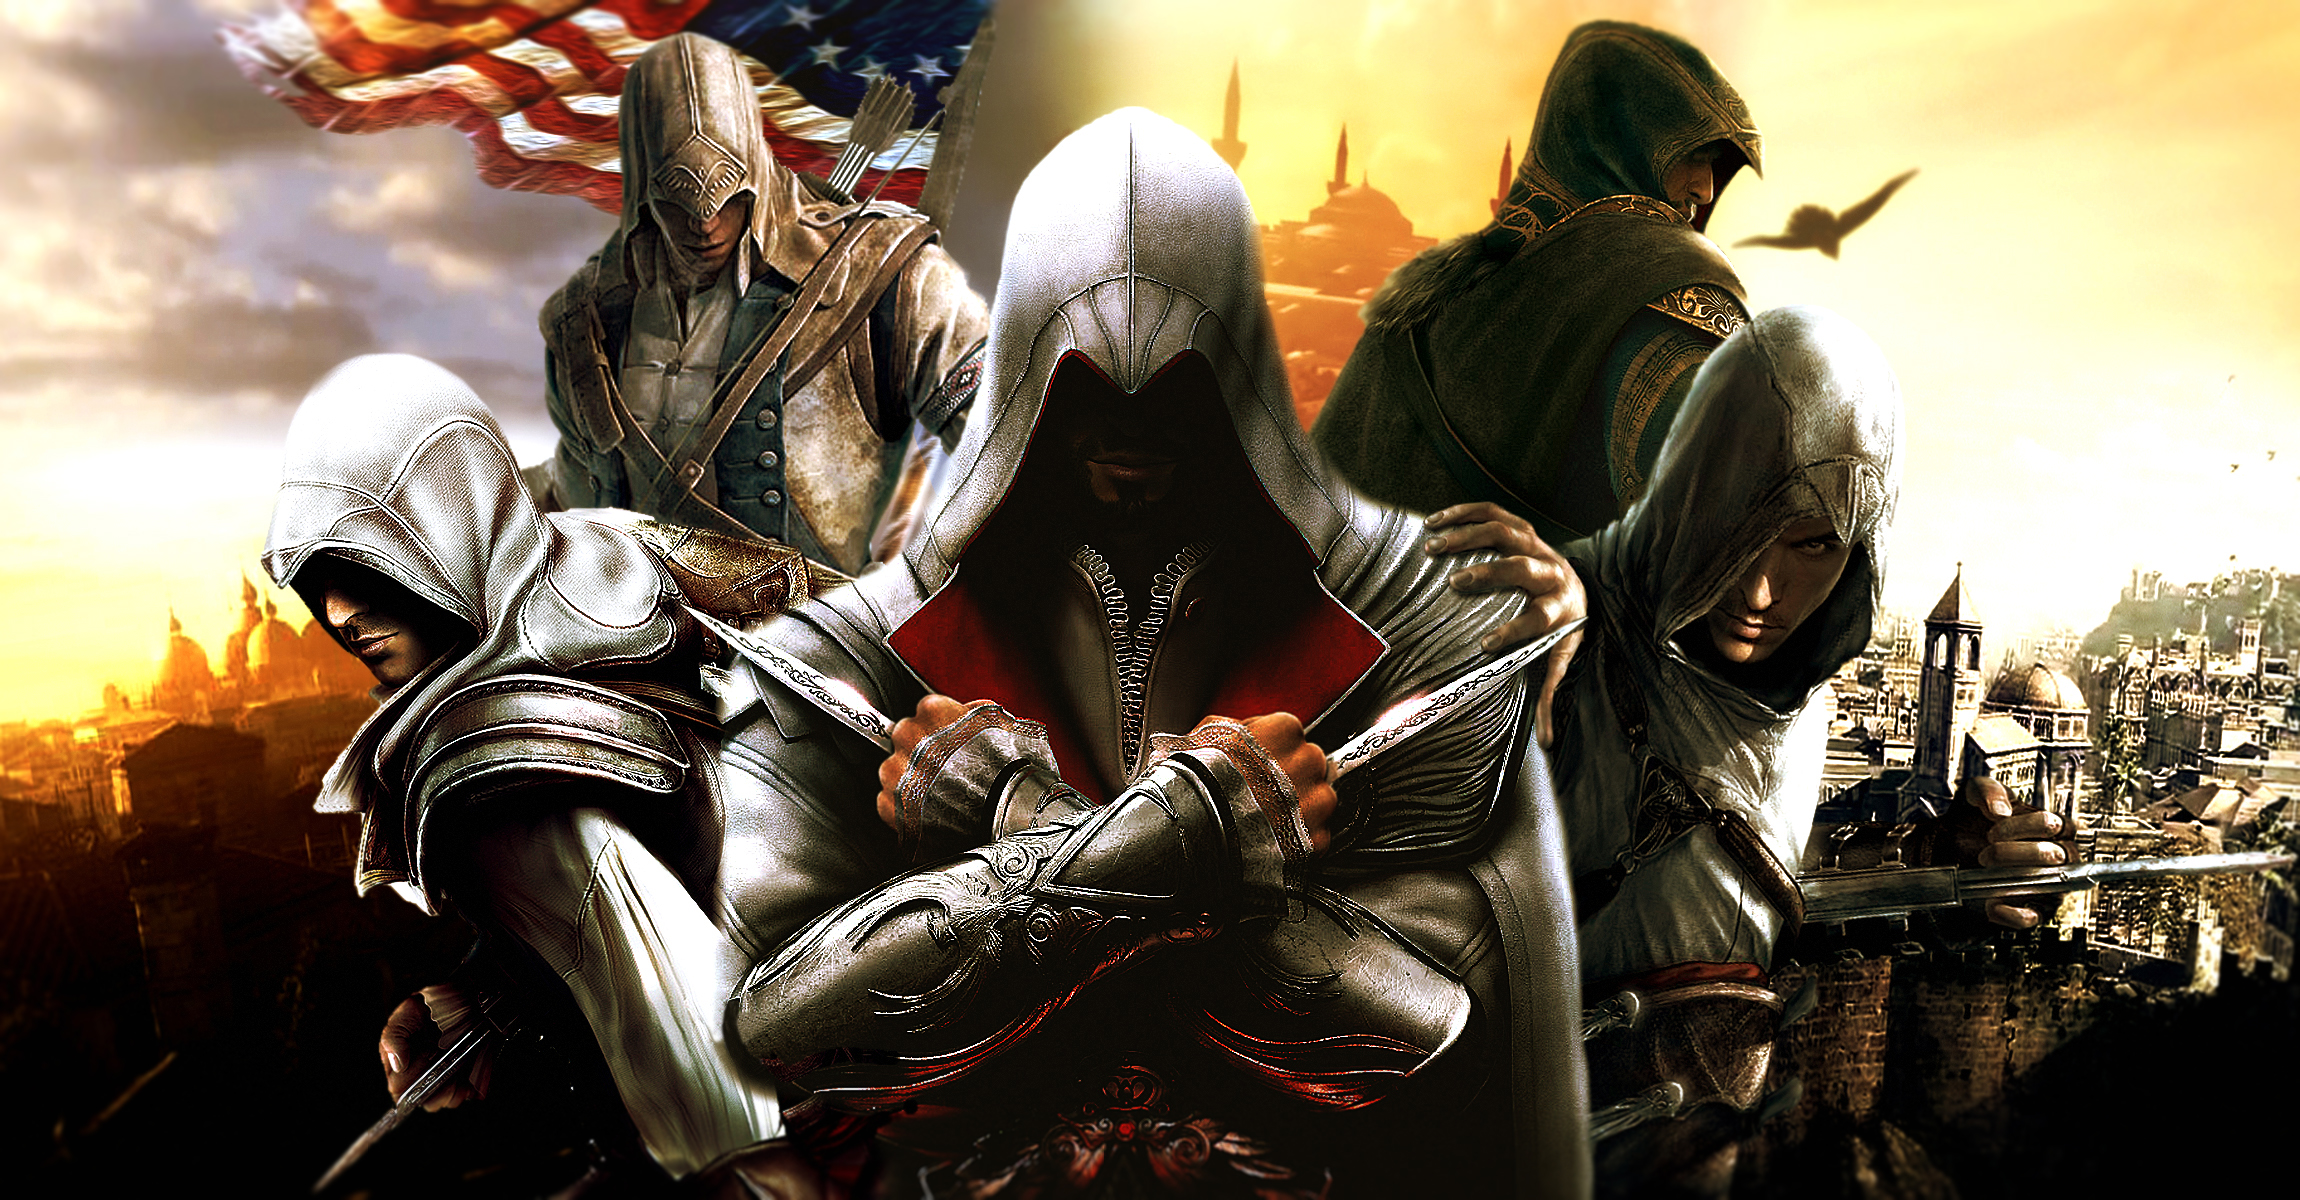 Free HD Altair (Assassin's Creed)